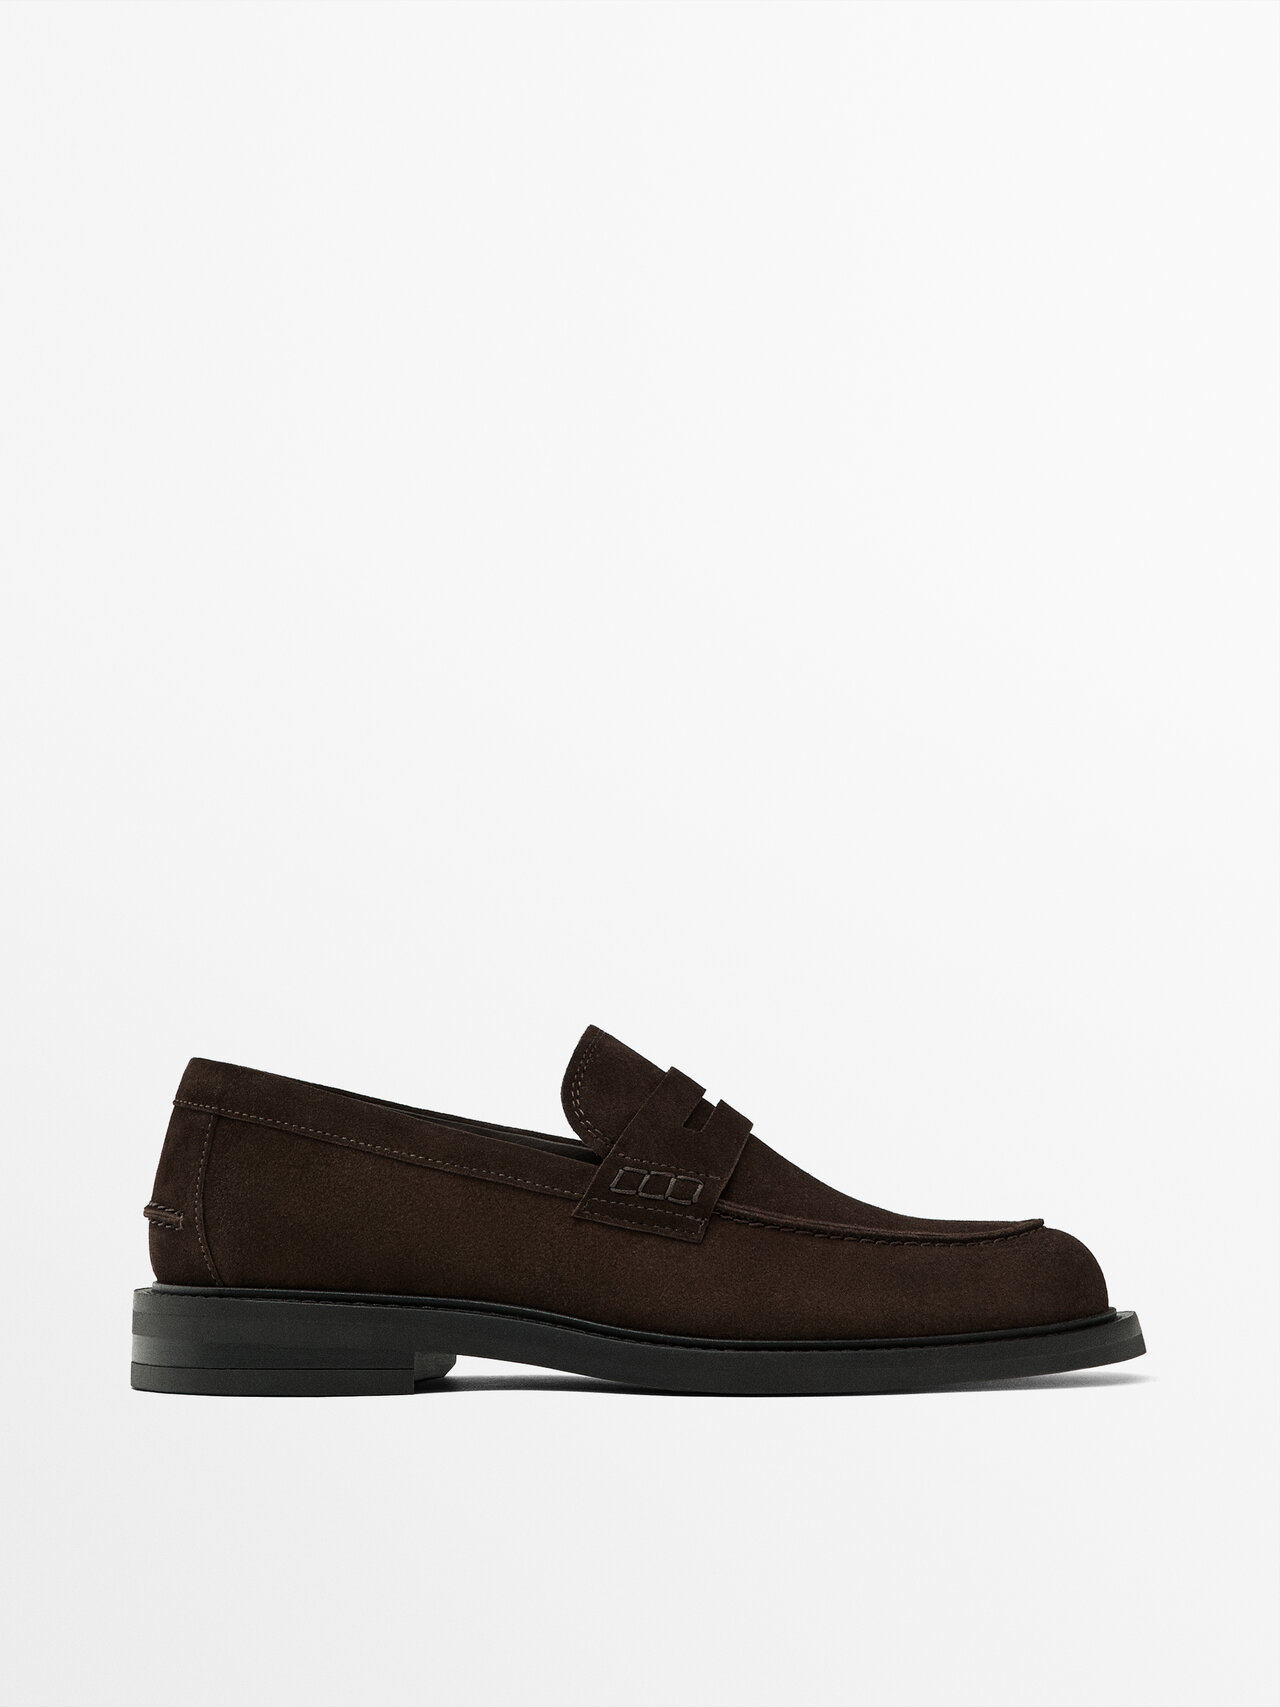 Massimo Dutti Split Suede Penny Loafers In Brown